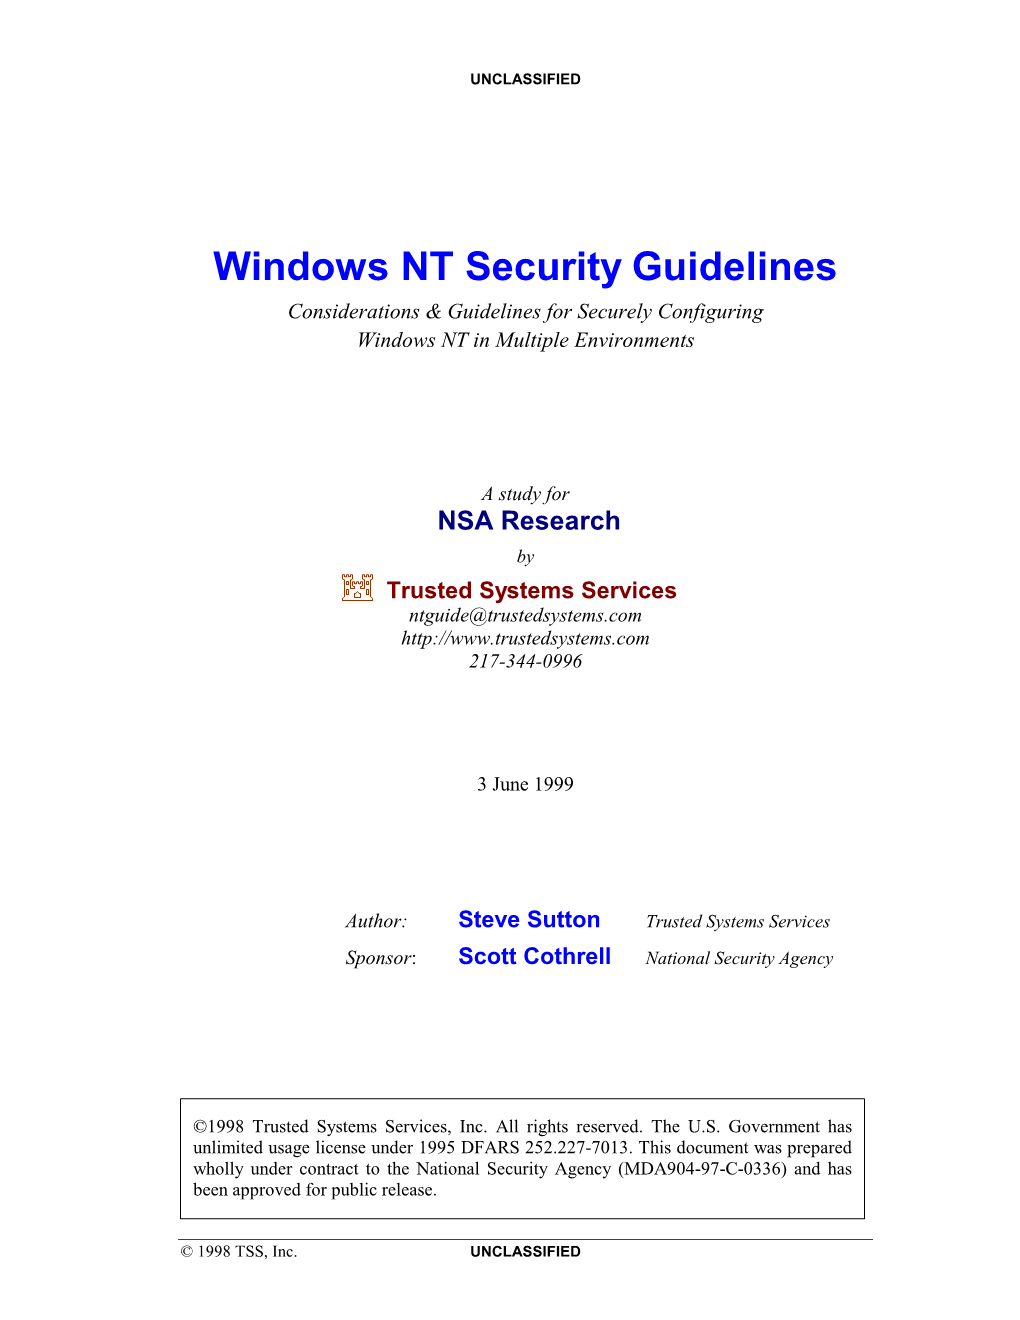 Windows NT Security Guidelines Considerations & Guidelines for Securely Configuring Windows NT in Multiple Environments